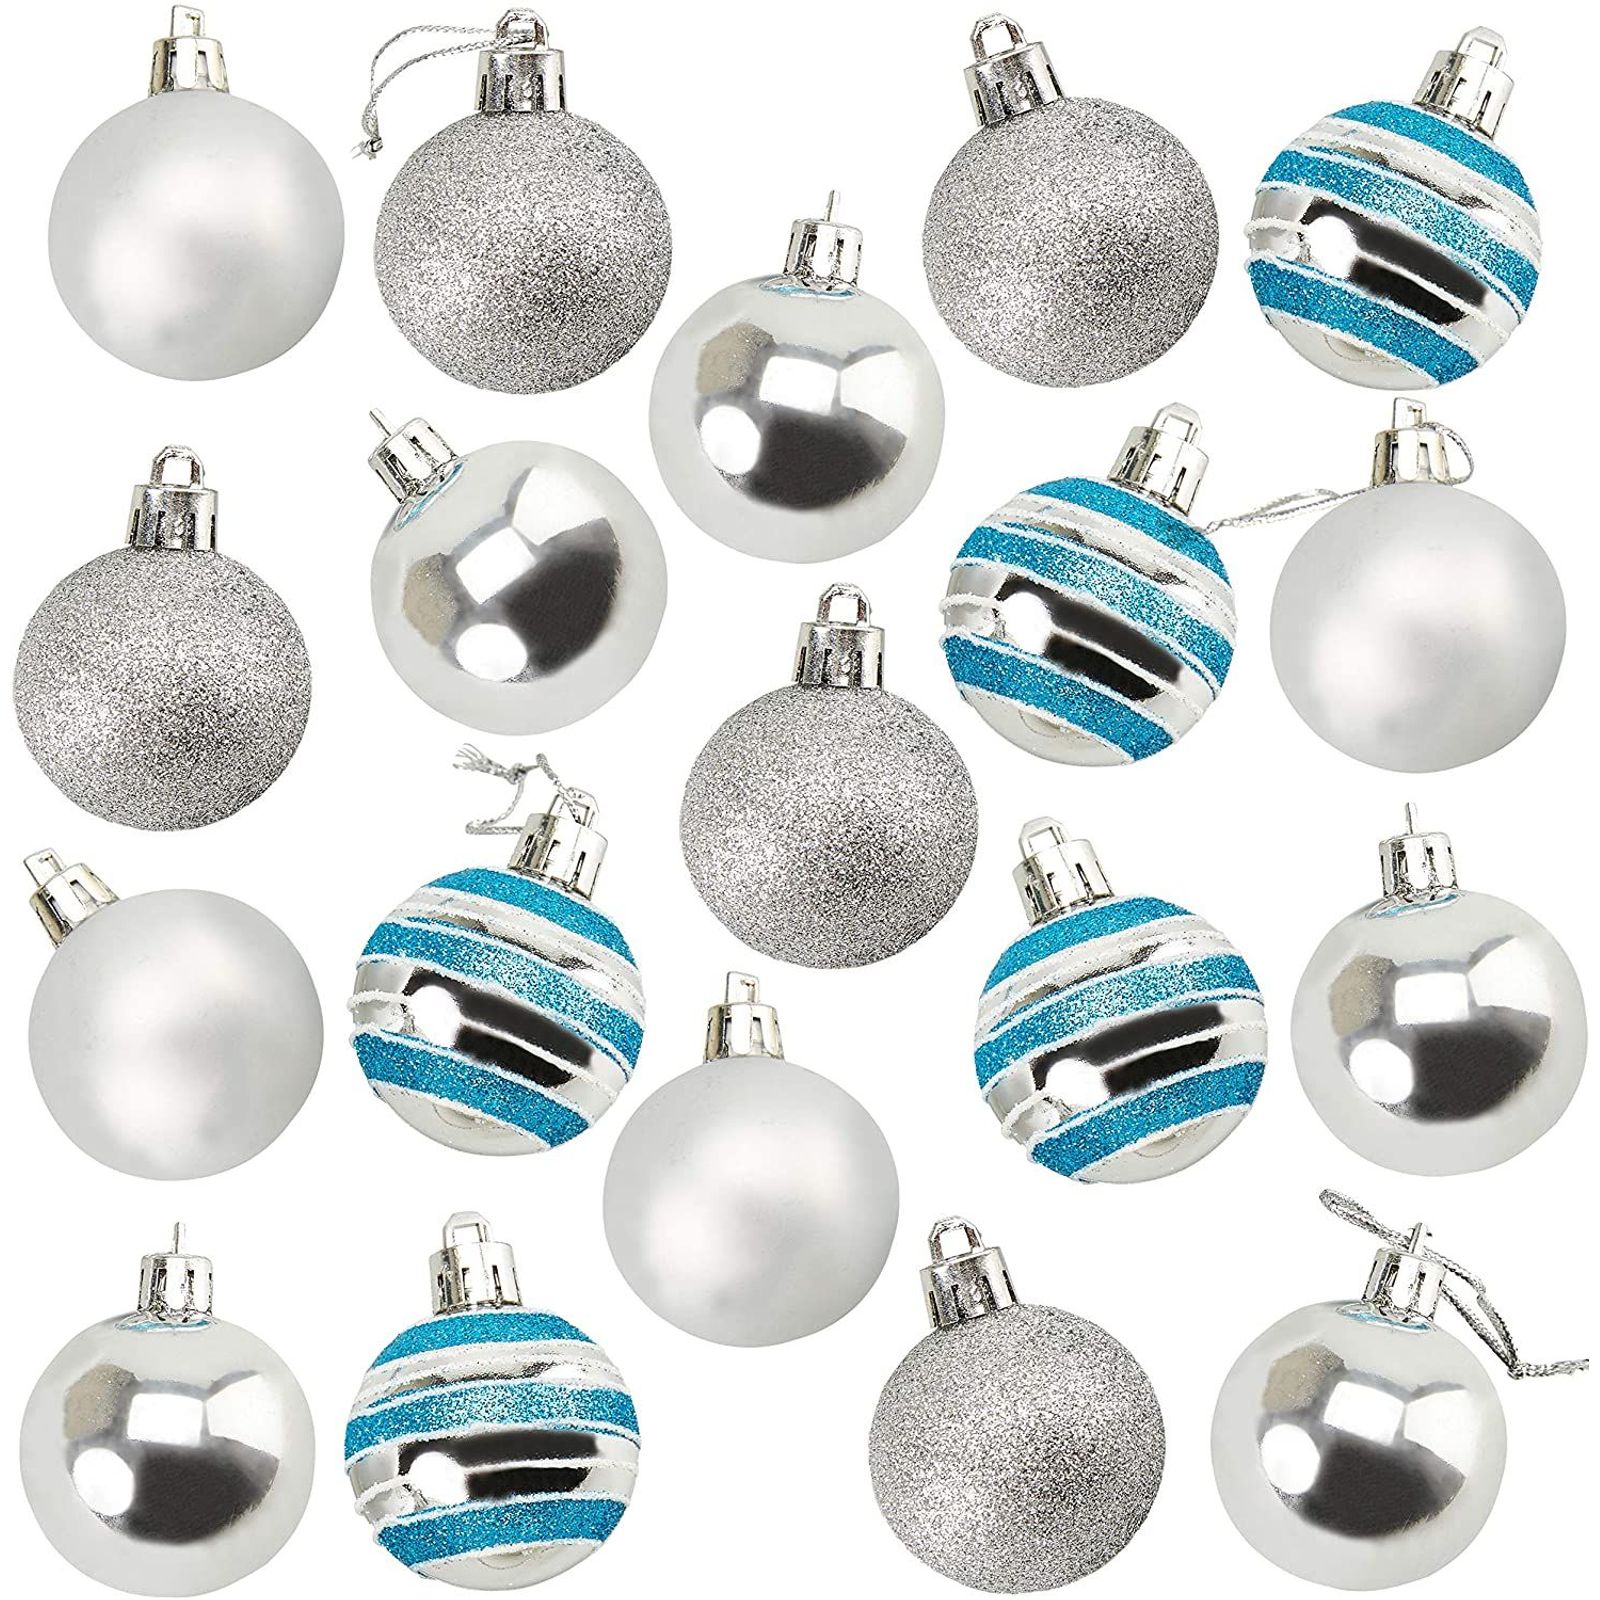 24 Pcs Christmas Ball Ornaments with Hanging Rope, Shatterproof Plastic ...